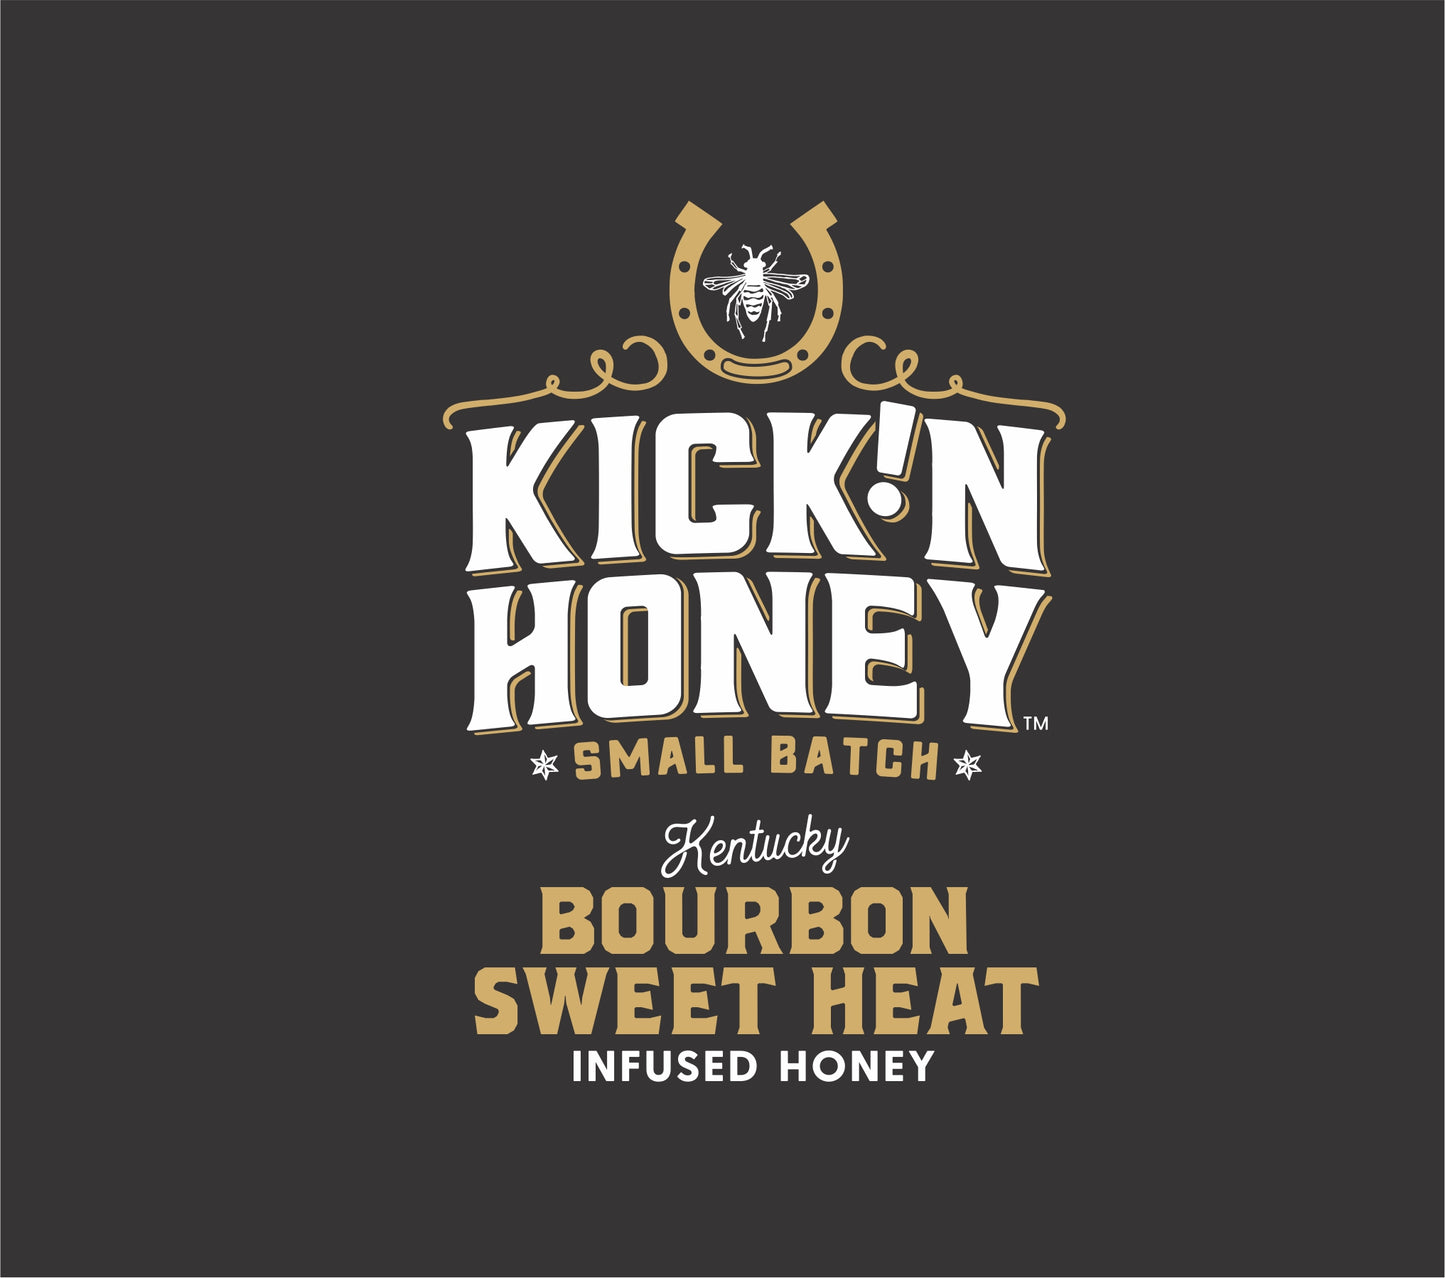 Bourbon Sweet Heat Honey is bourbon hot honey. Our bourbon flavor is infused with real Kentucky bourbon, so it's barely legal. Kidding, it's totally within the legal limits. It's pure Kentucky, it's pure bourbon hot honey. 